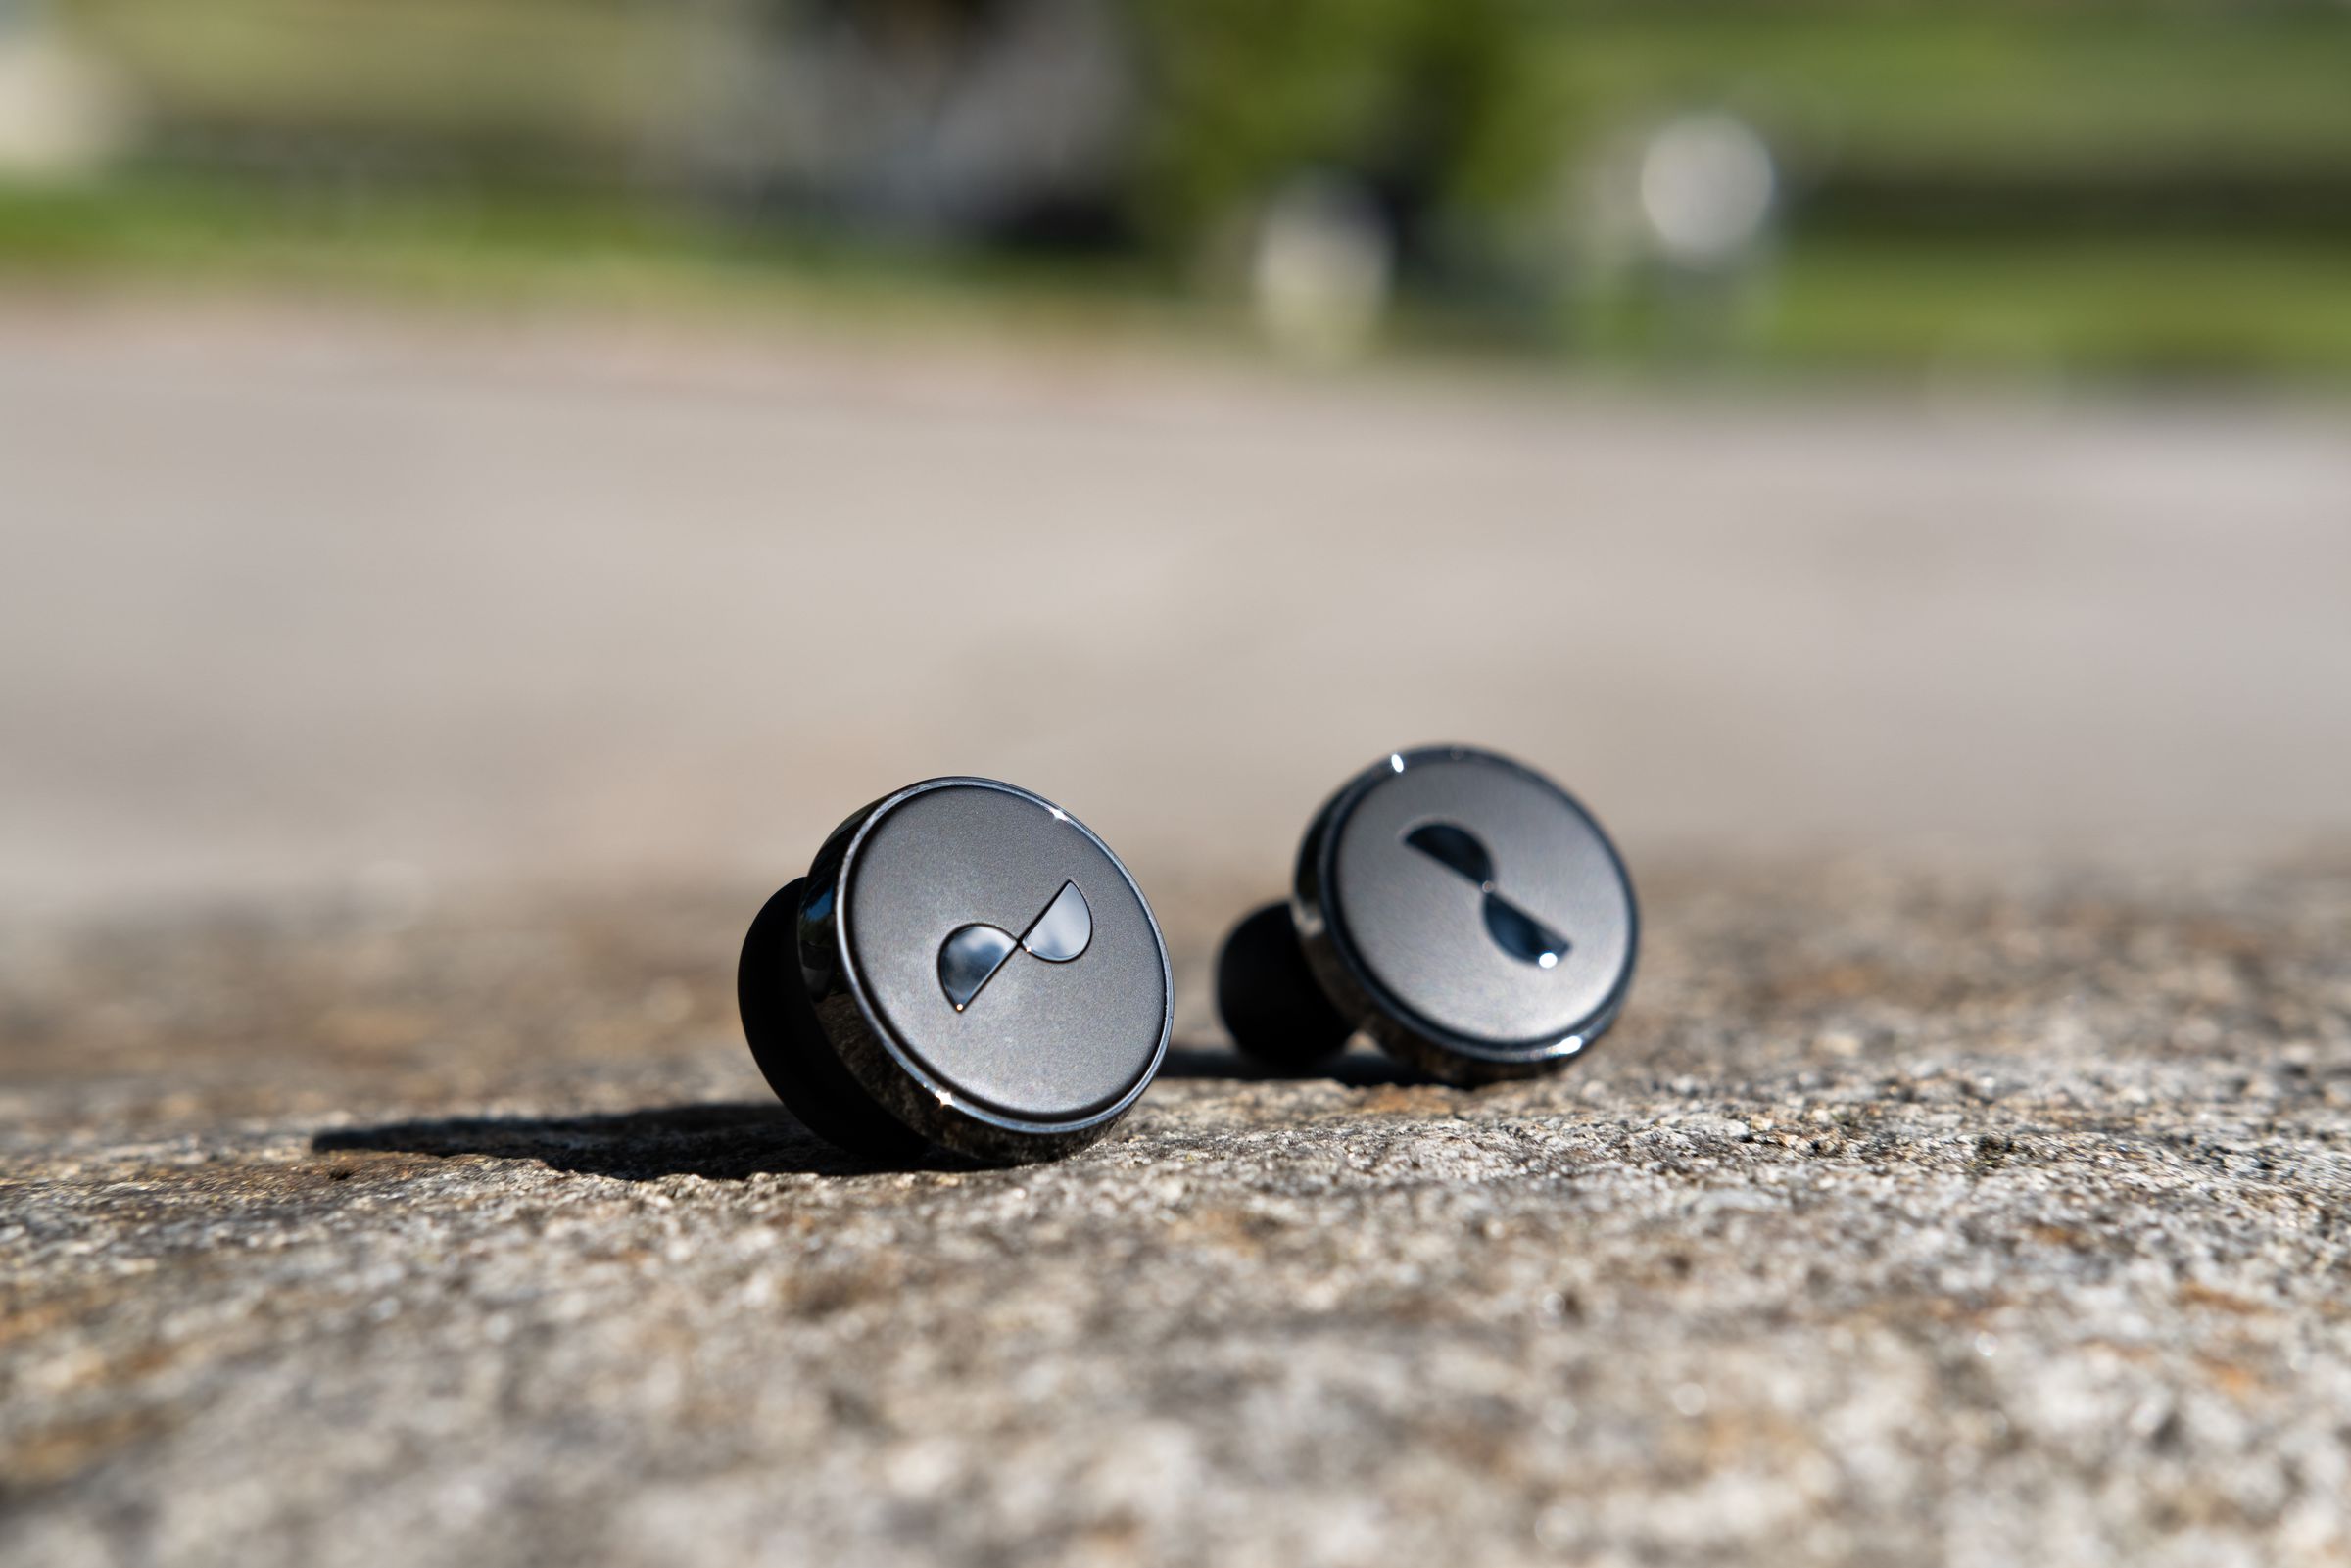 The NuraTrue Pro earbuds, outside of their case.